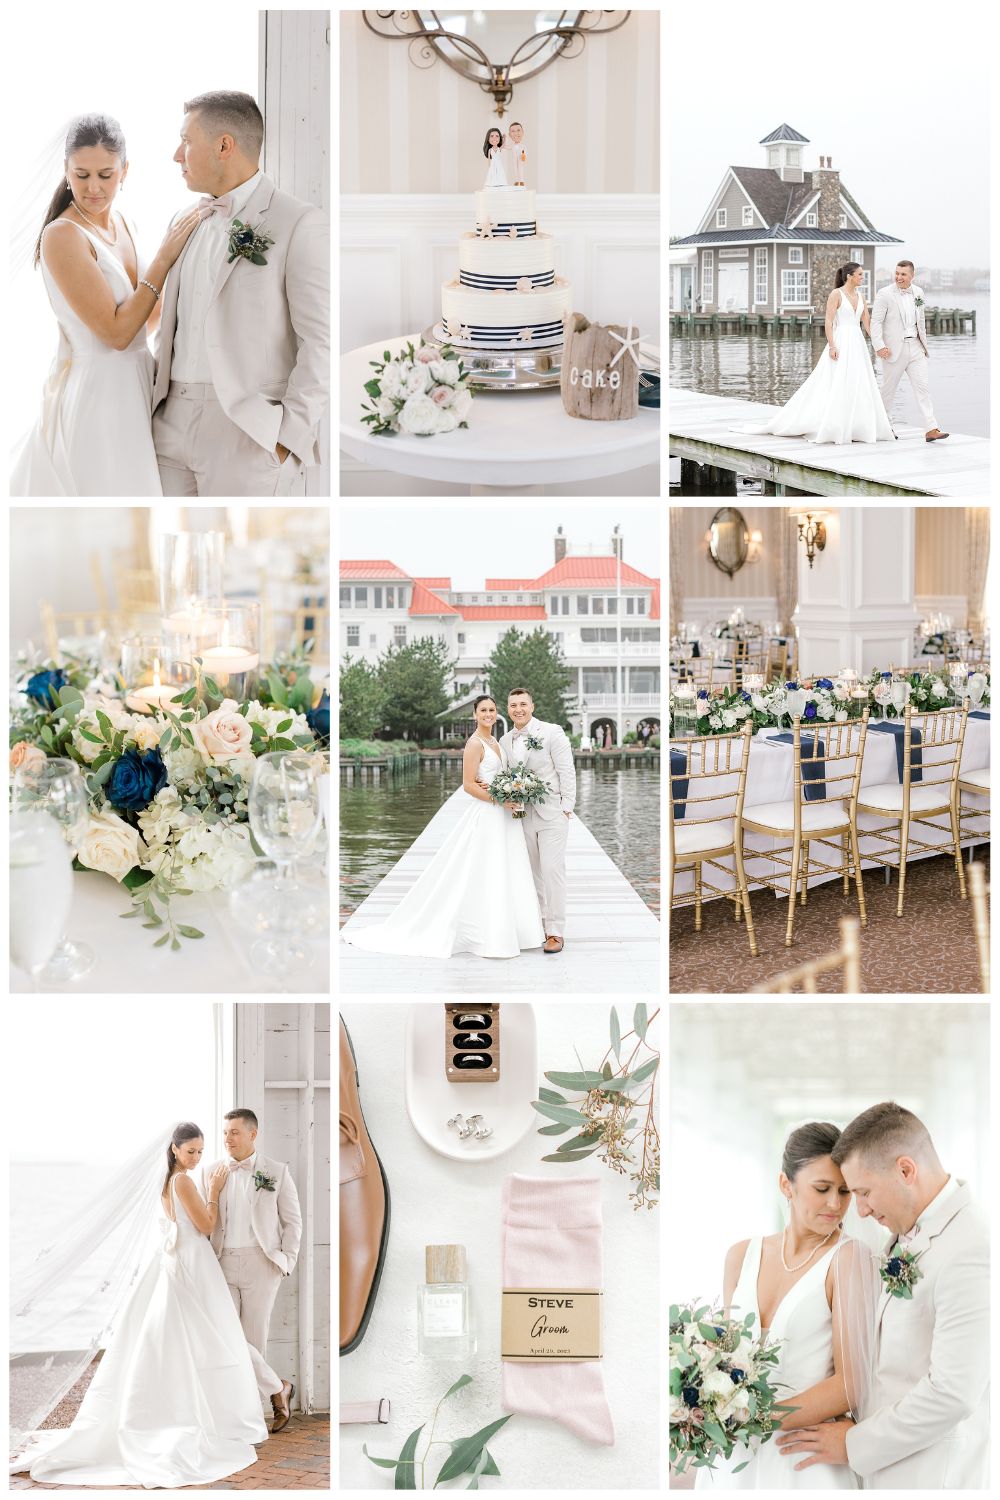 Mallard Island Yacht Club wedding with navy and white beach inspired details photographed by wedding photographer Susan Elizabeth Weddings